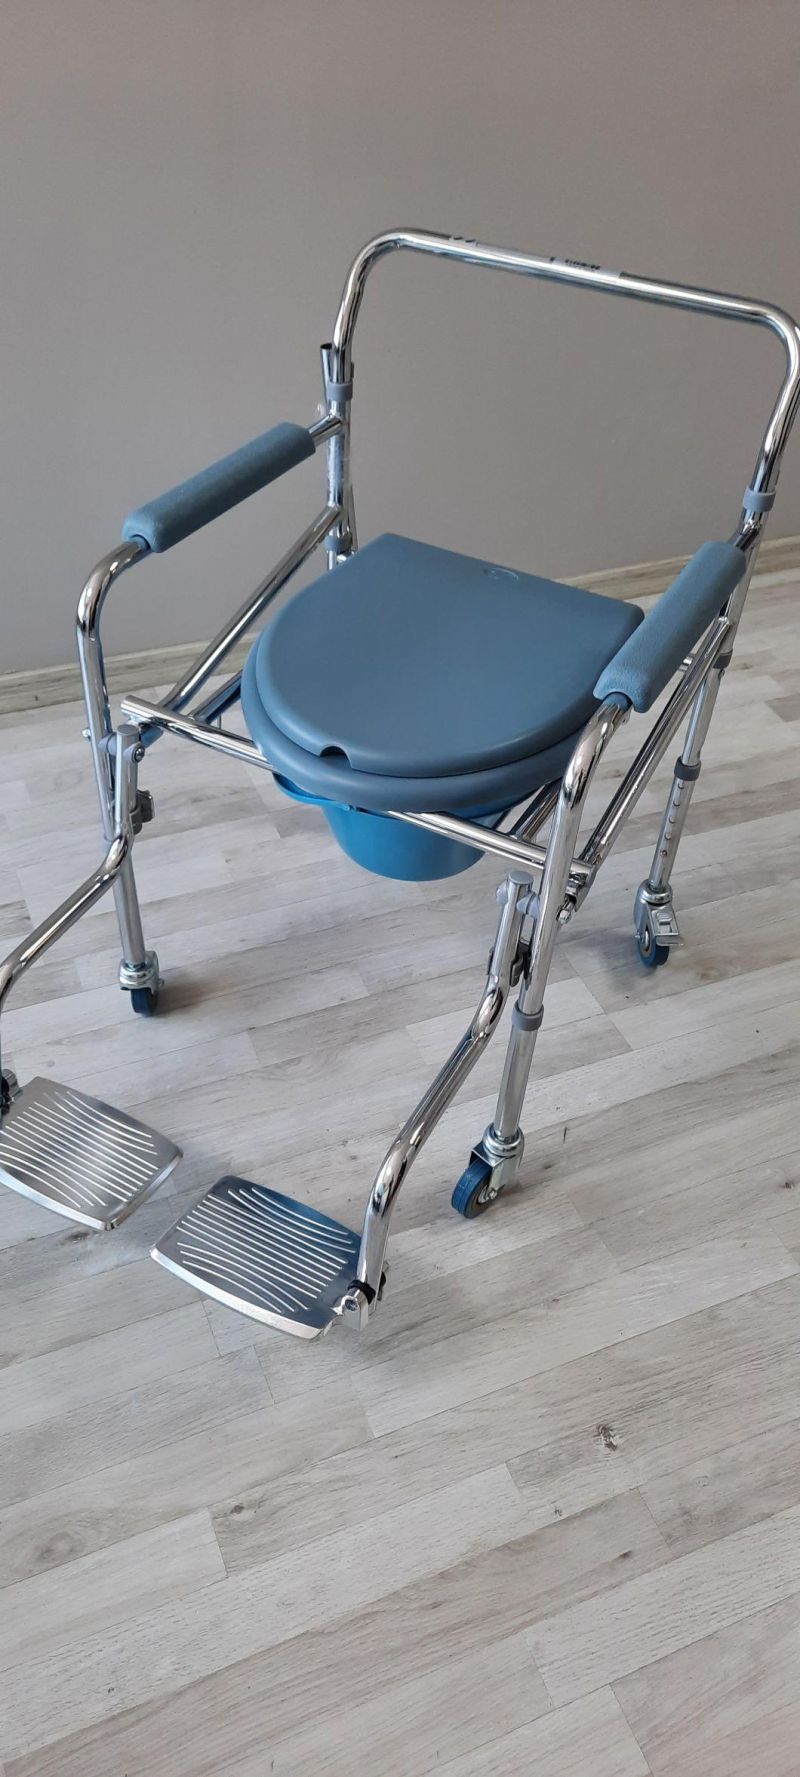 Aluminum Chrome Folding Wheelchair Disabled Commode Chair with Cheap Price Bme 668